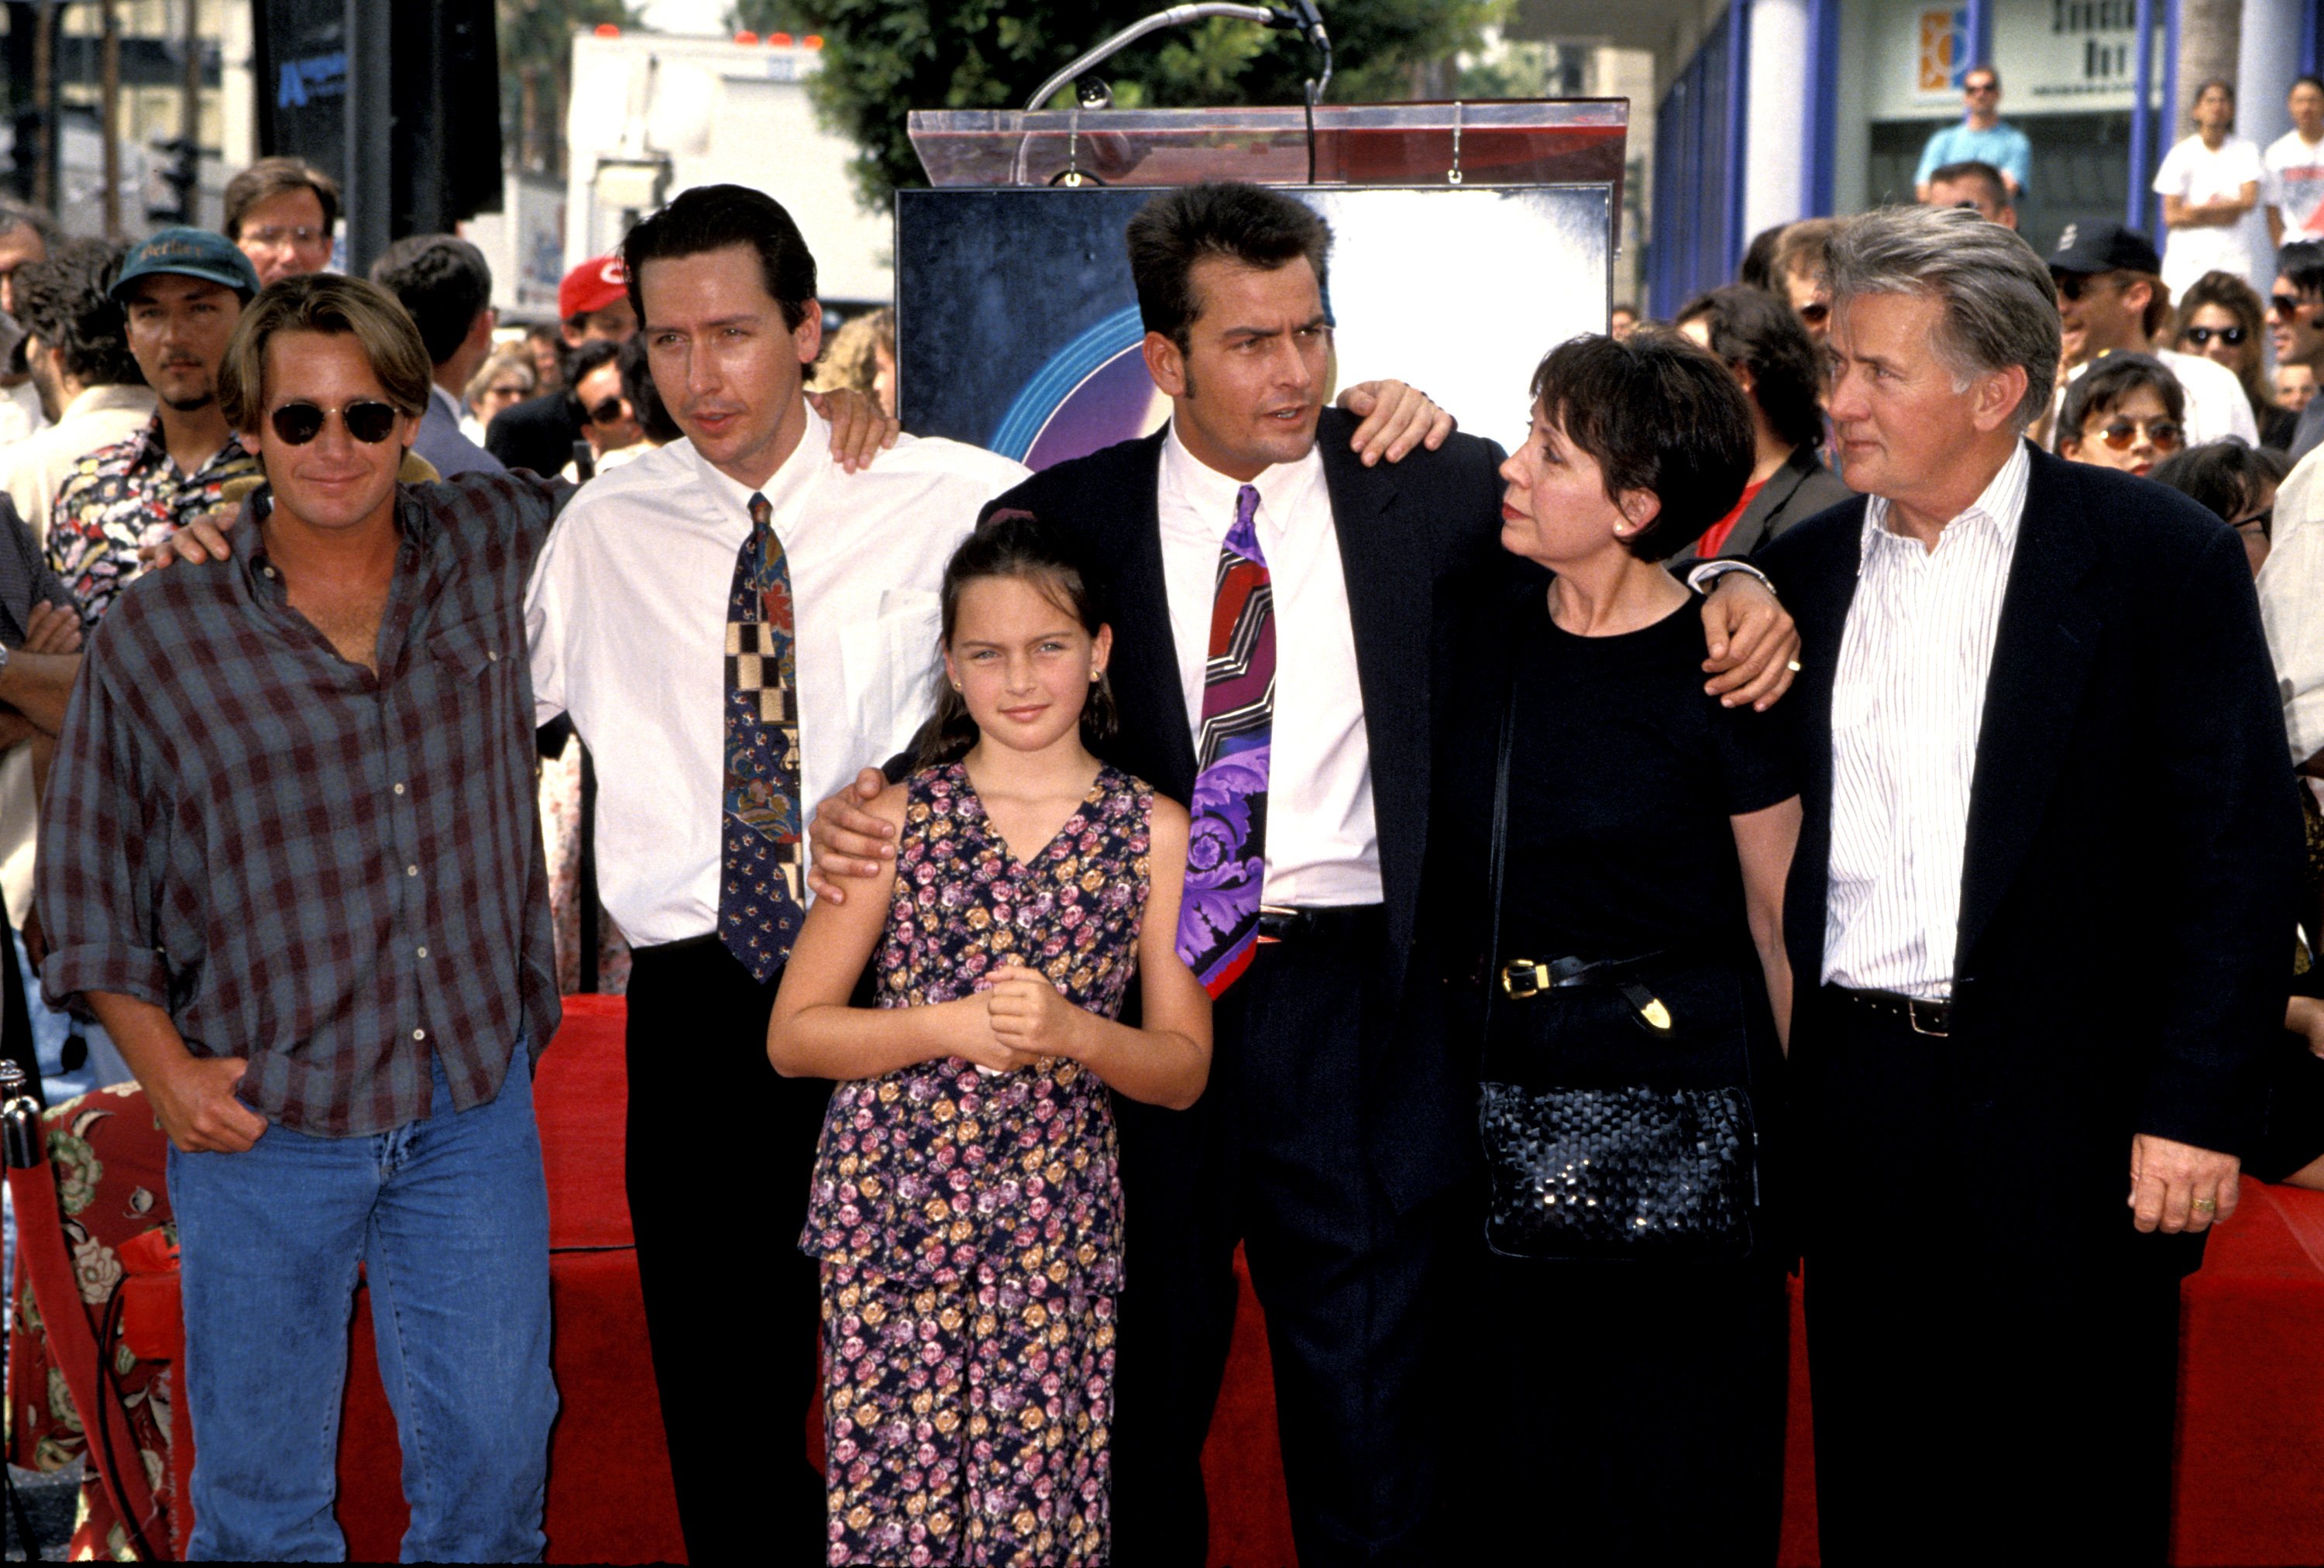 Emilio Estevez, Ramone Estevez, honoree Charlie Sheen, Janet Sheen, and Martin Sheen at the Hollywood Walk of Fame in September 23, 1994, in California | Source: Getty Images 